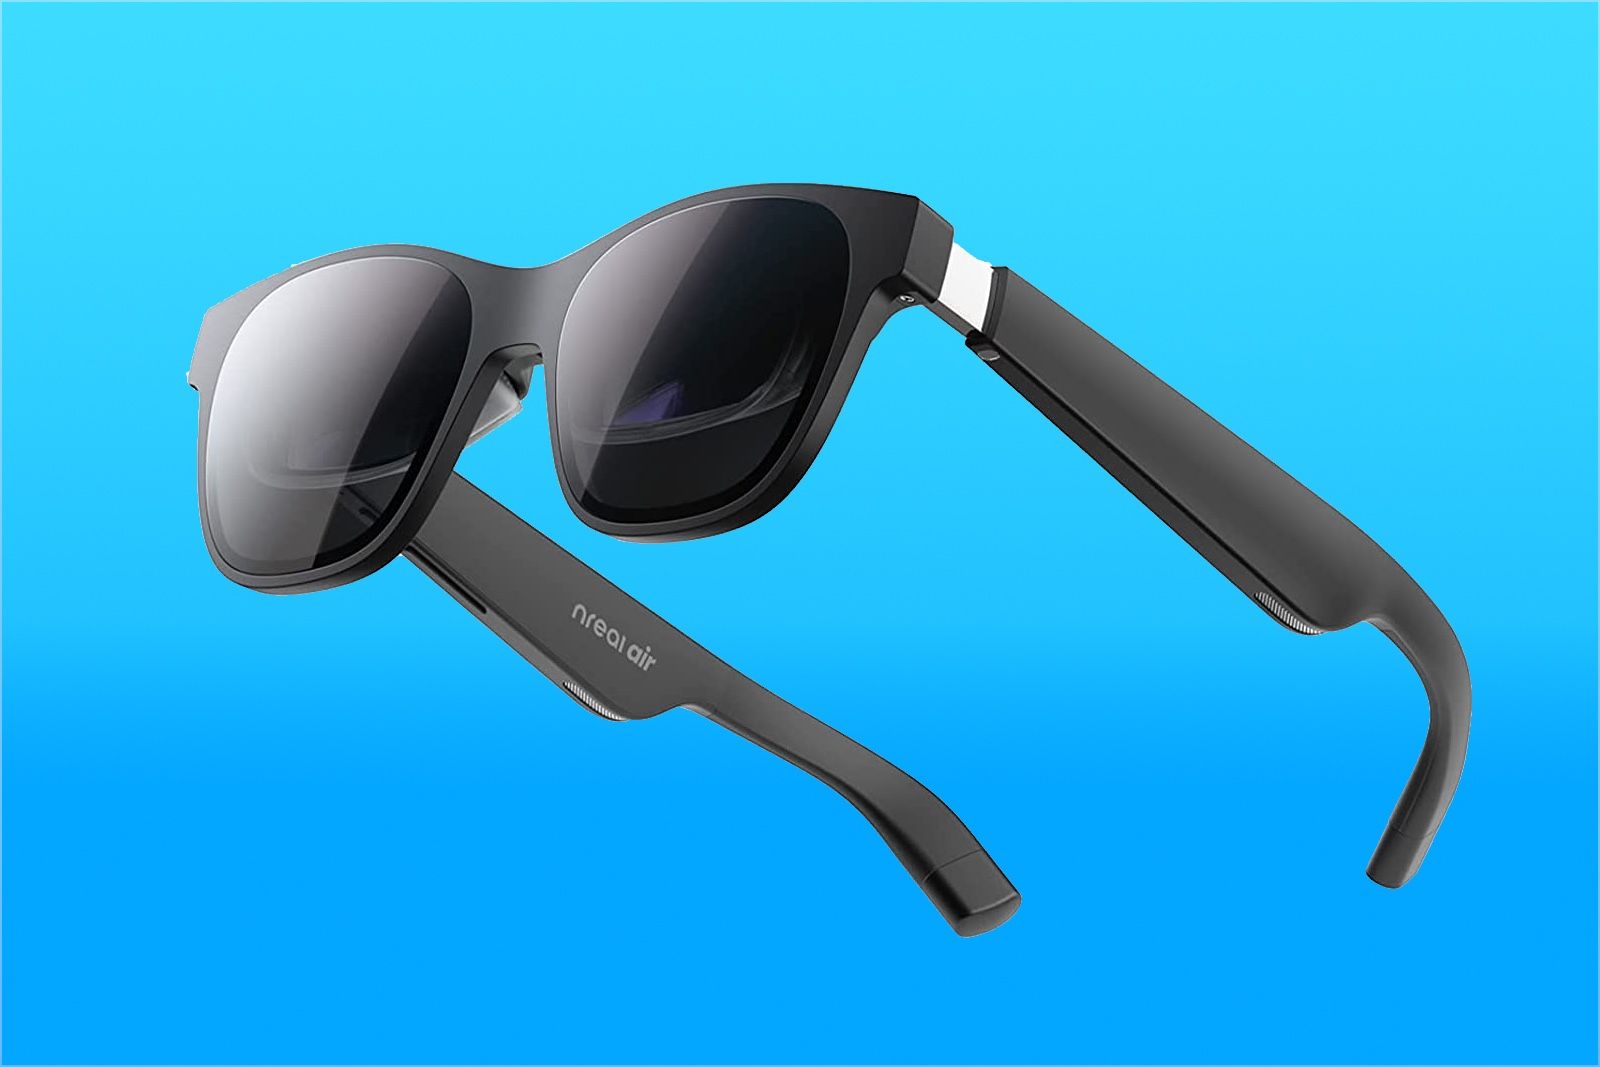 NReal Air AR glasses review - we're not ready for this